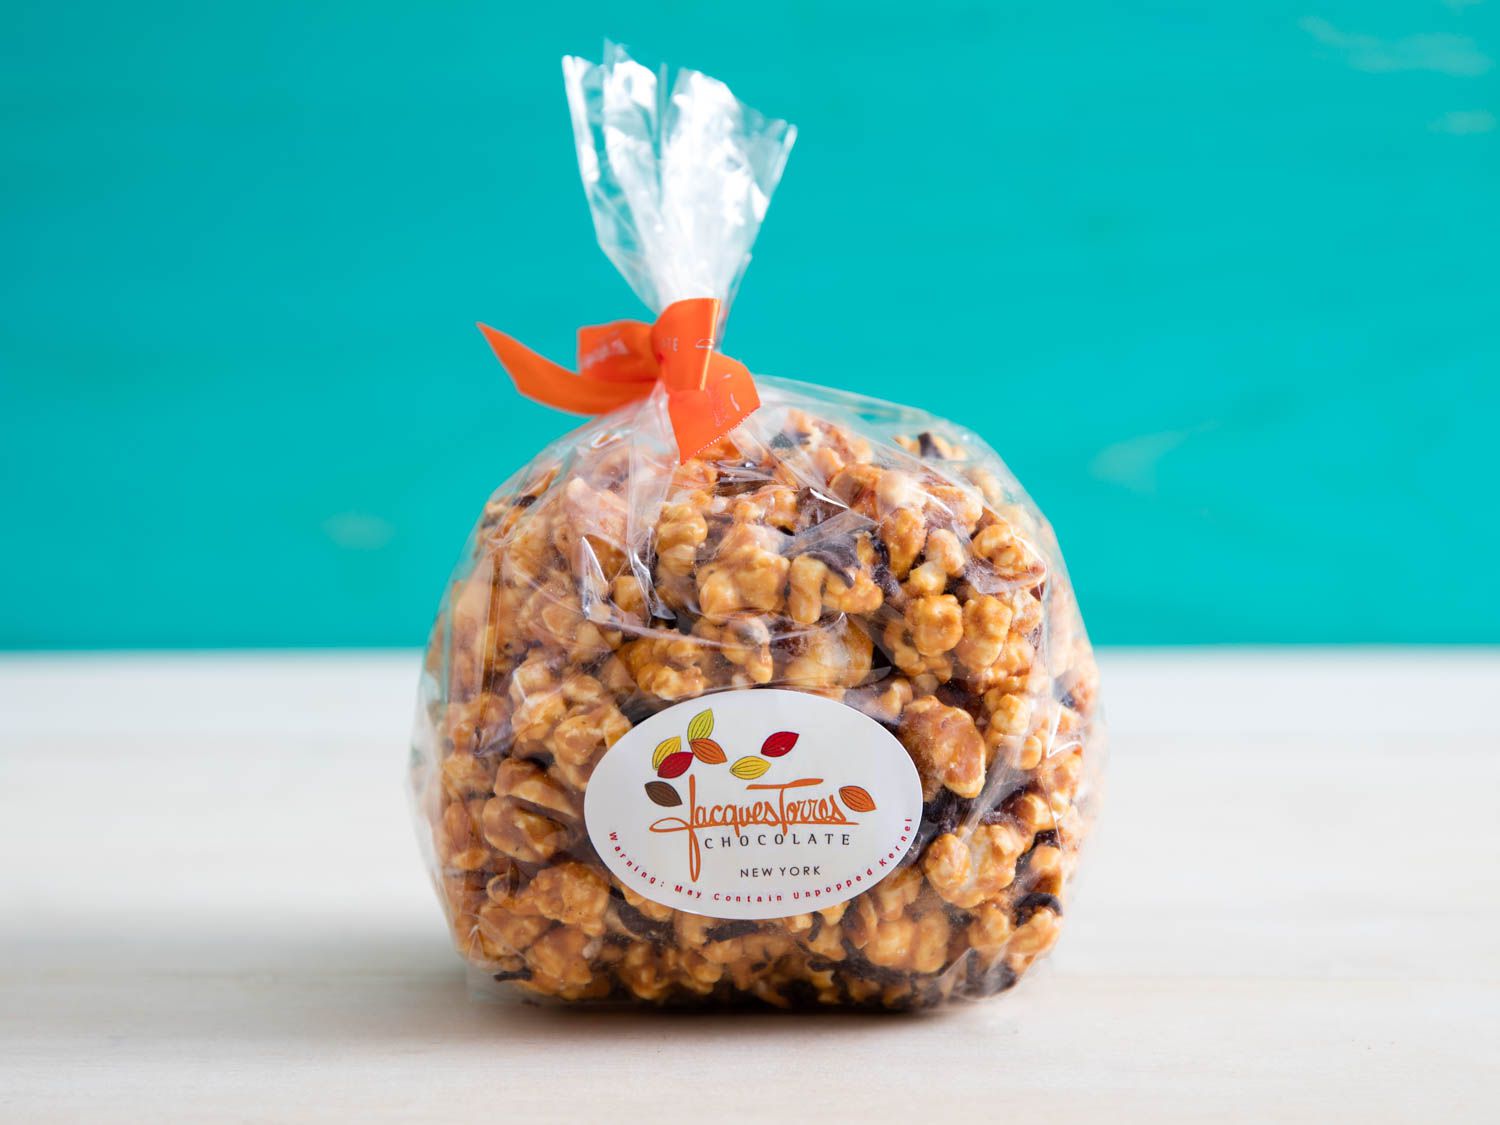 A bag of caramel popcorn from Jacques Torres Chocolates.